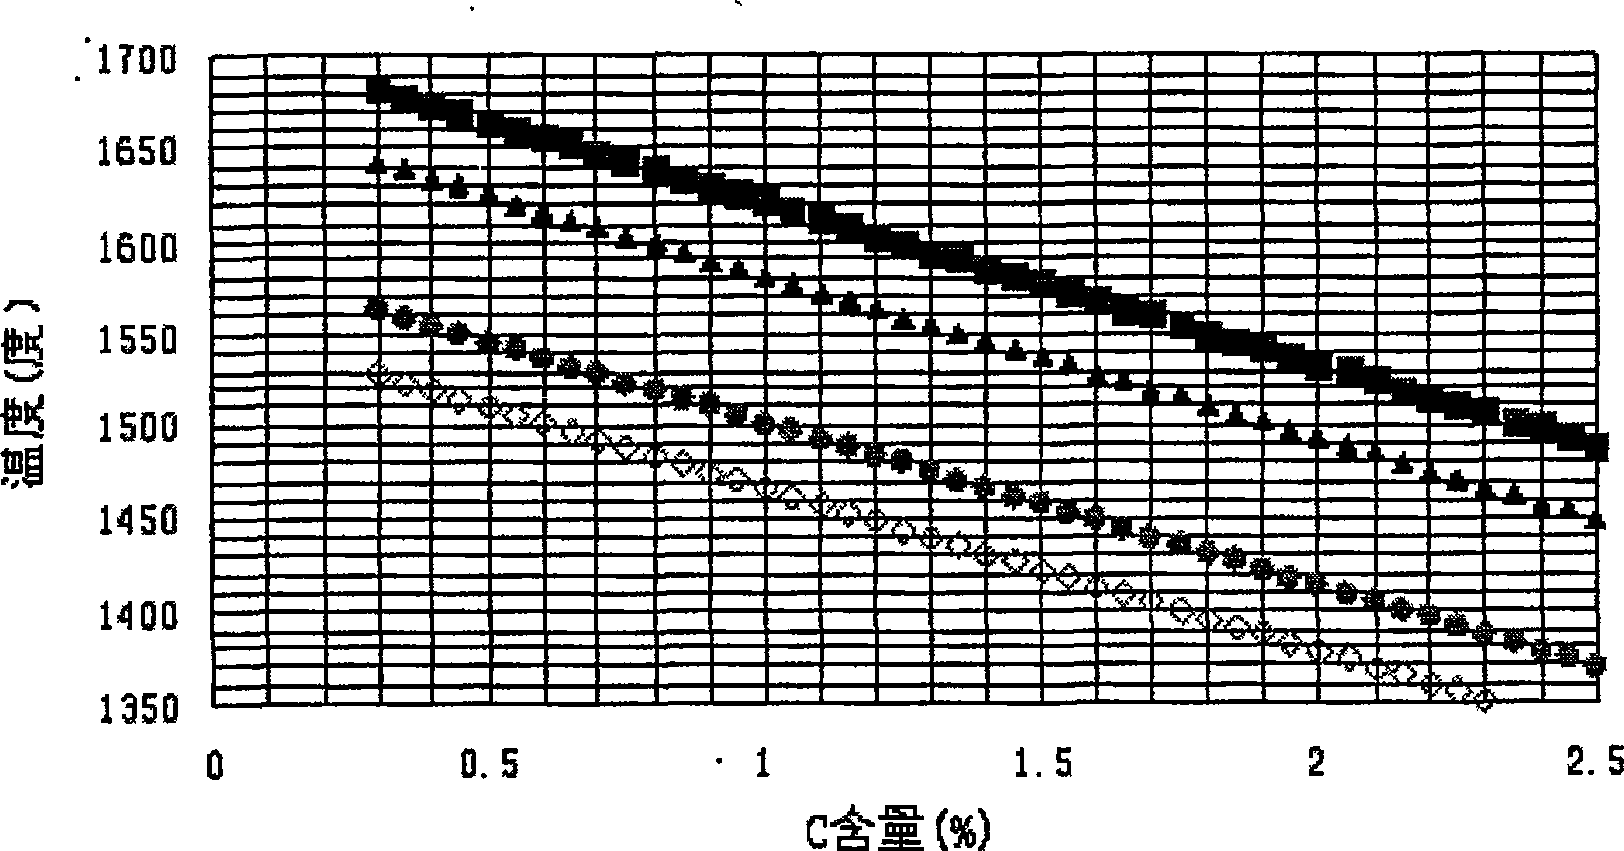 Nichrome steel alloy for smelting stainless steel and producing method thereof